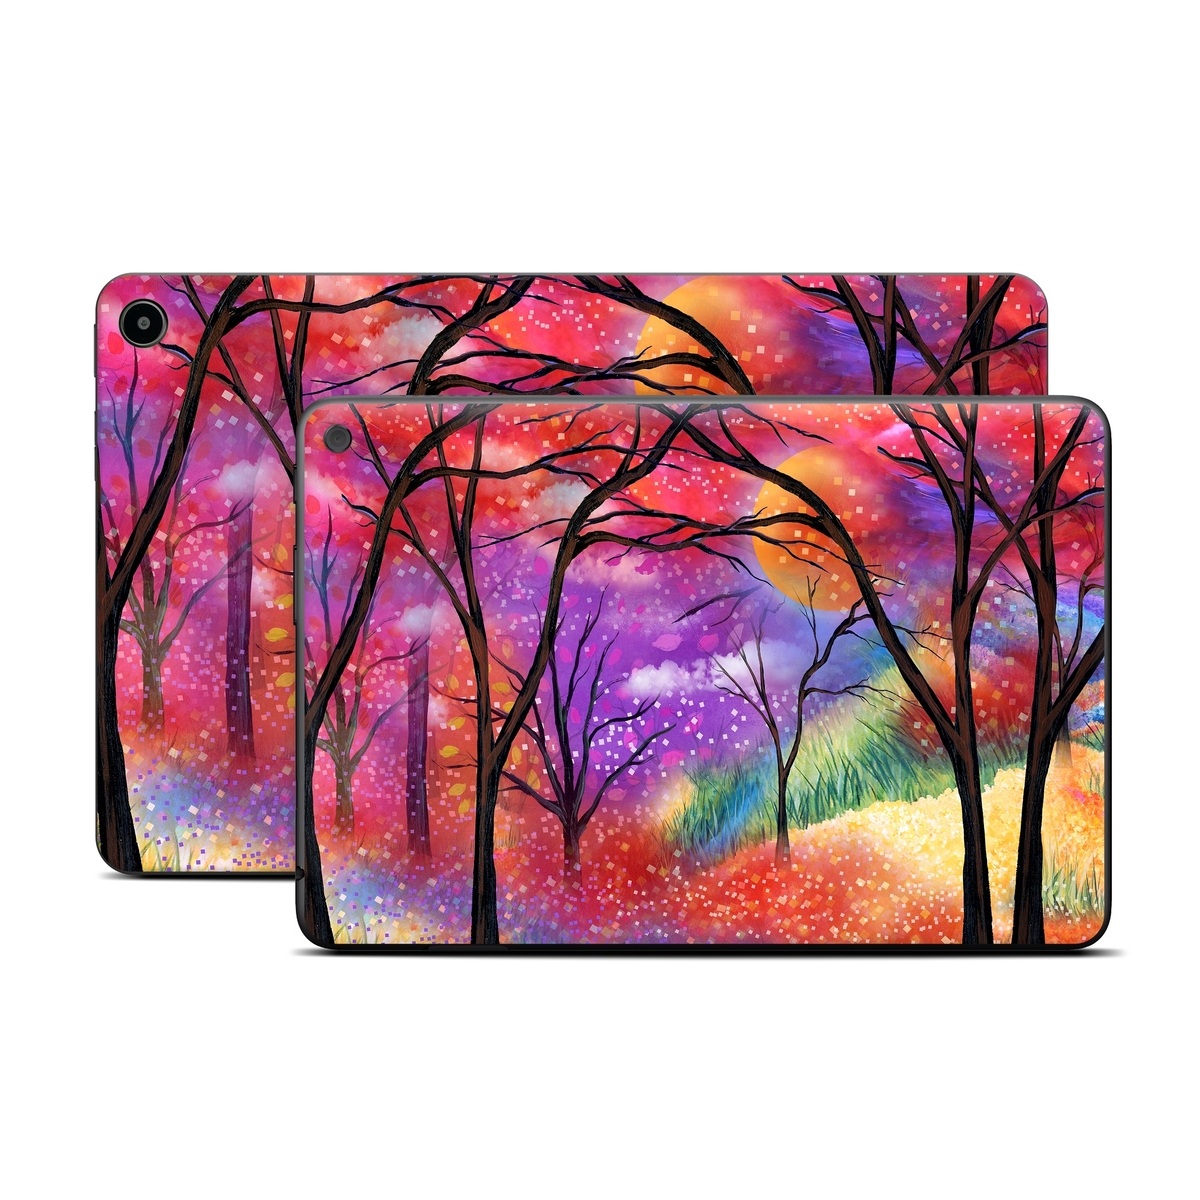 Amazon Fire Tablet Series Skin Skin design of Nature, Tree, Natural landscape, Painting, Watercolor paint, Branch, Acrylic paint, Purple, Modern art, Leaf, with red, purple, black, gray, green, blue colors